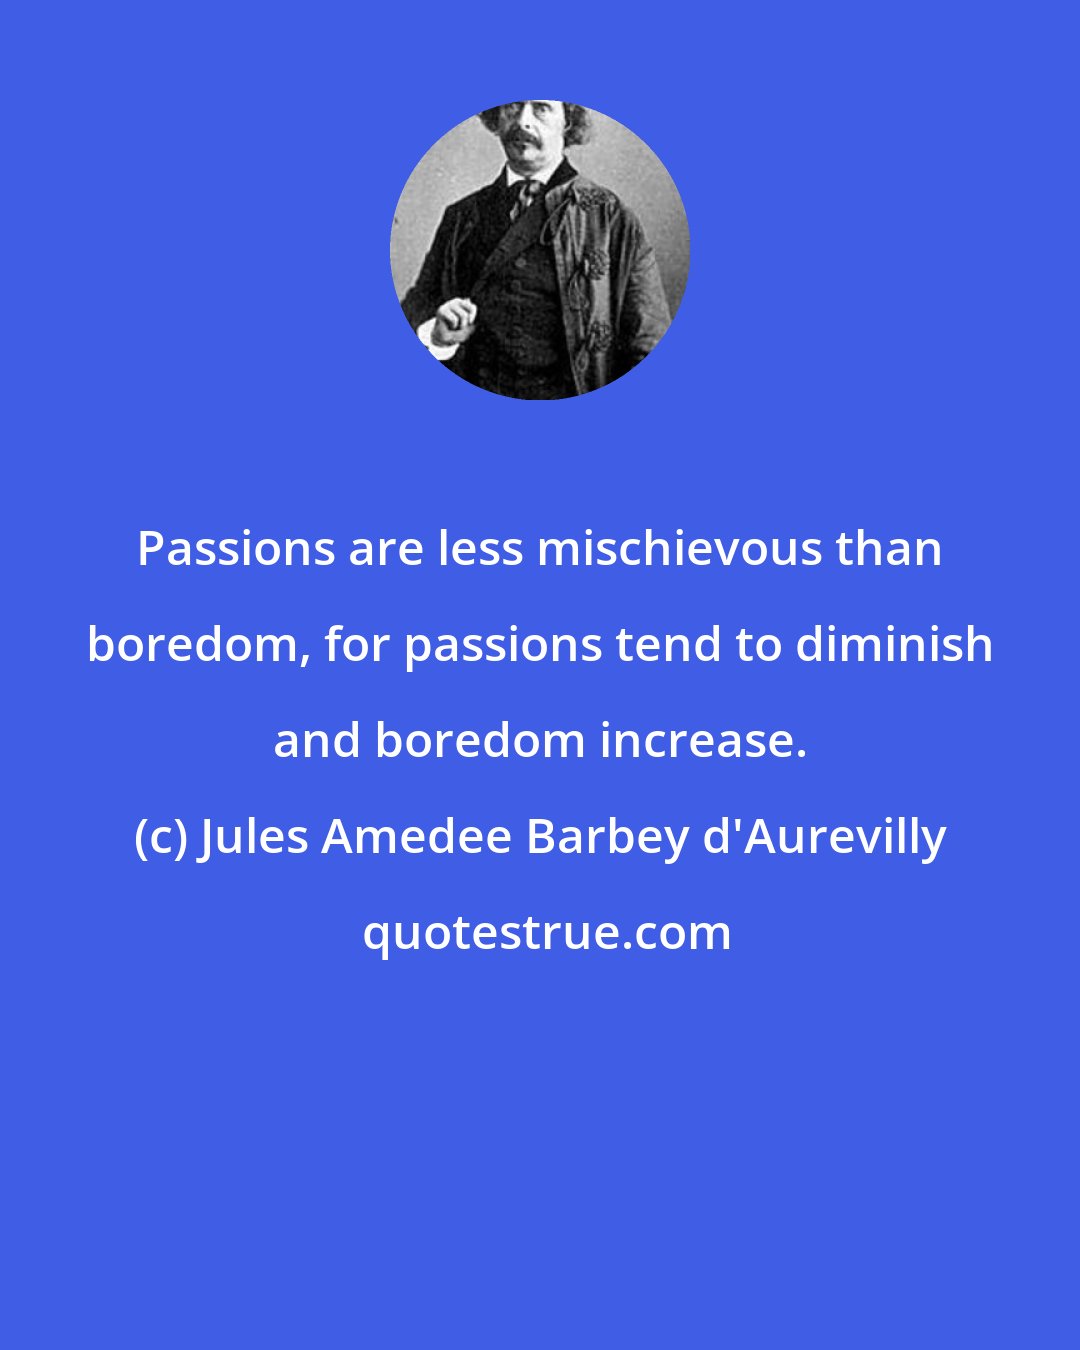 Jules Amedee Barbey d'Aurevilly: Passions are less mischievous than boredom, for passions tend to diminish and boredom increase.